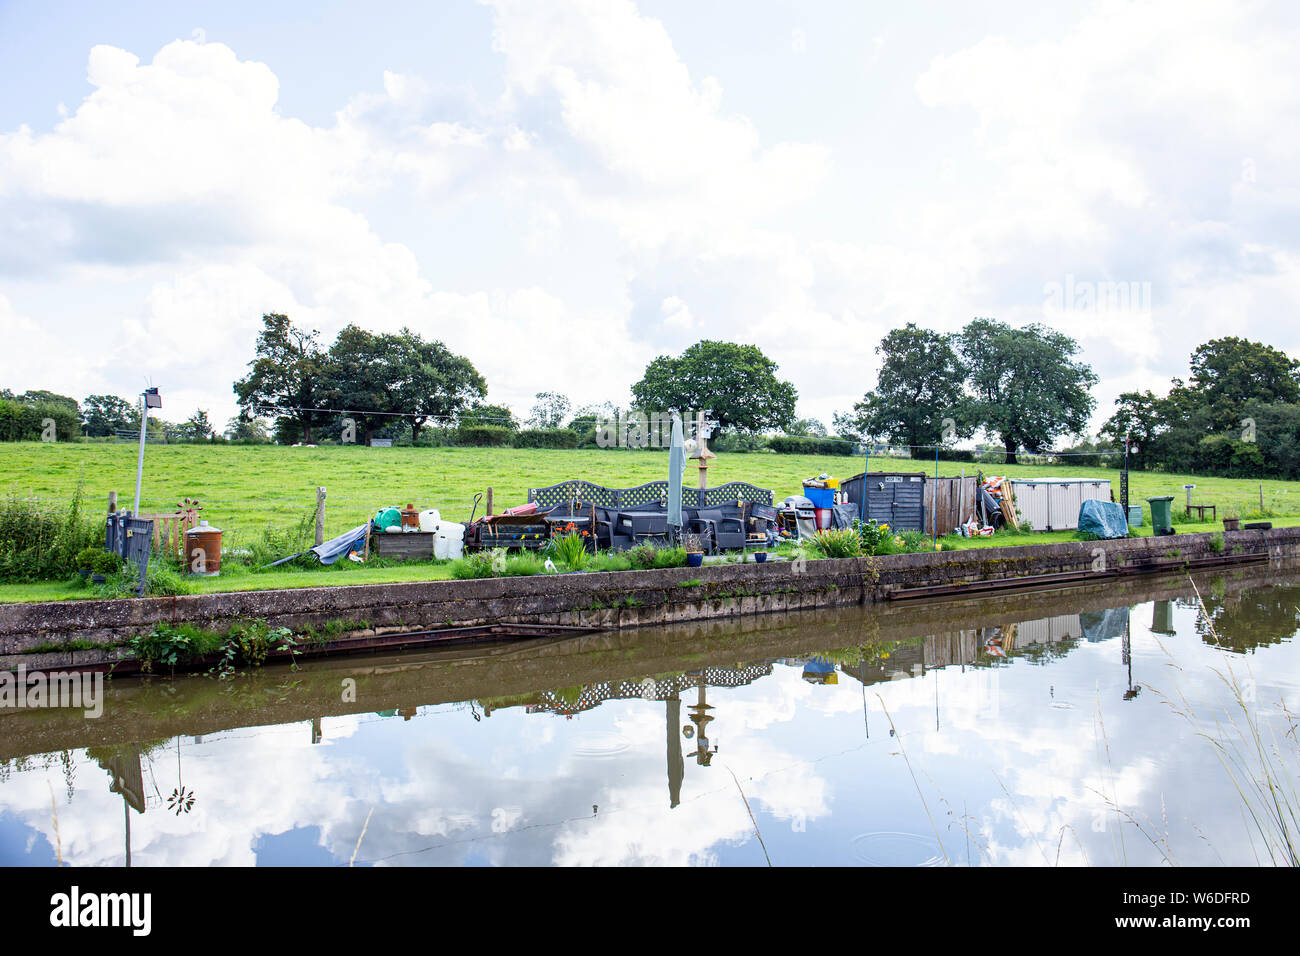 Reserved mooring space for an narrow boat called Moor Time with private garden, and mess, on the Trent and Mersey Canal in Cheshire UK Stock Photo